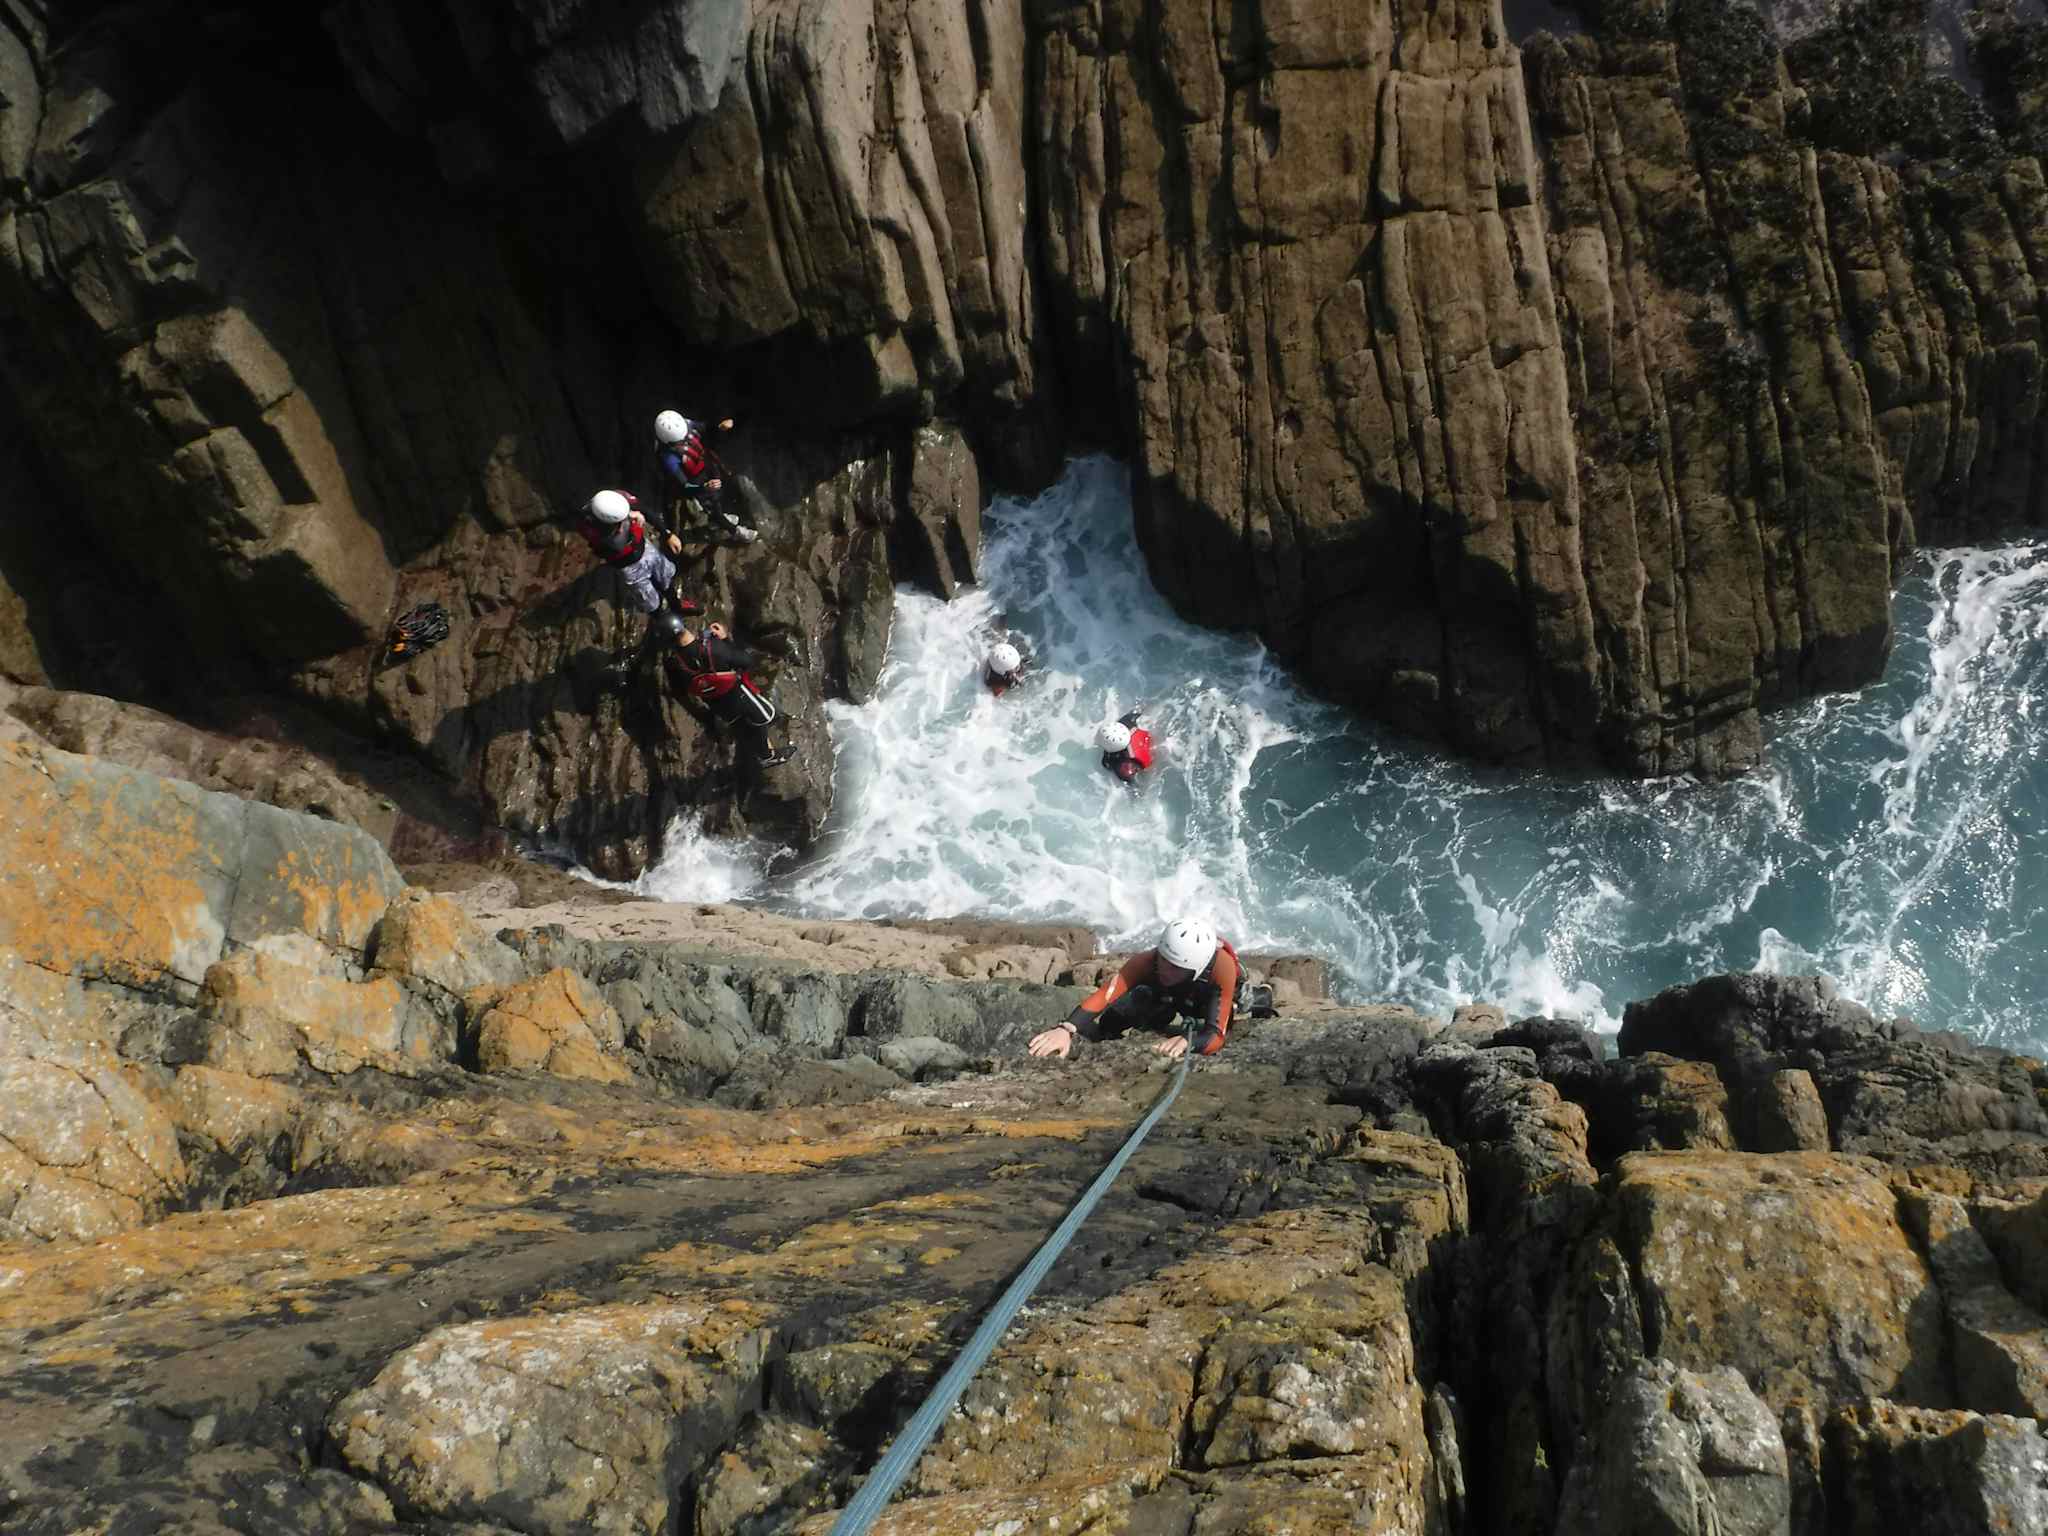 Take on the 24-hour Coastal Challenge in Pembrokeshire